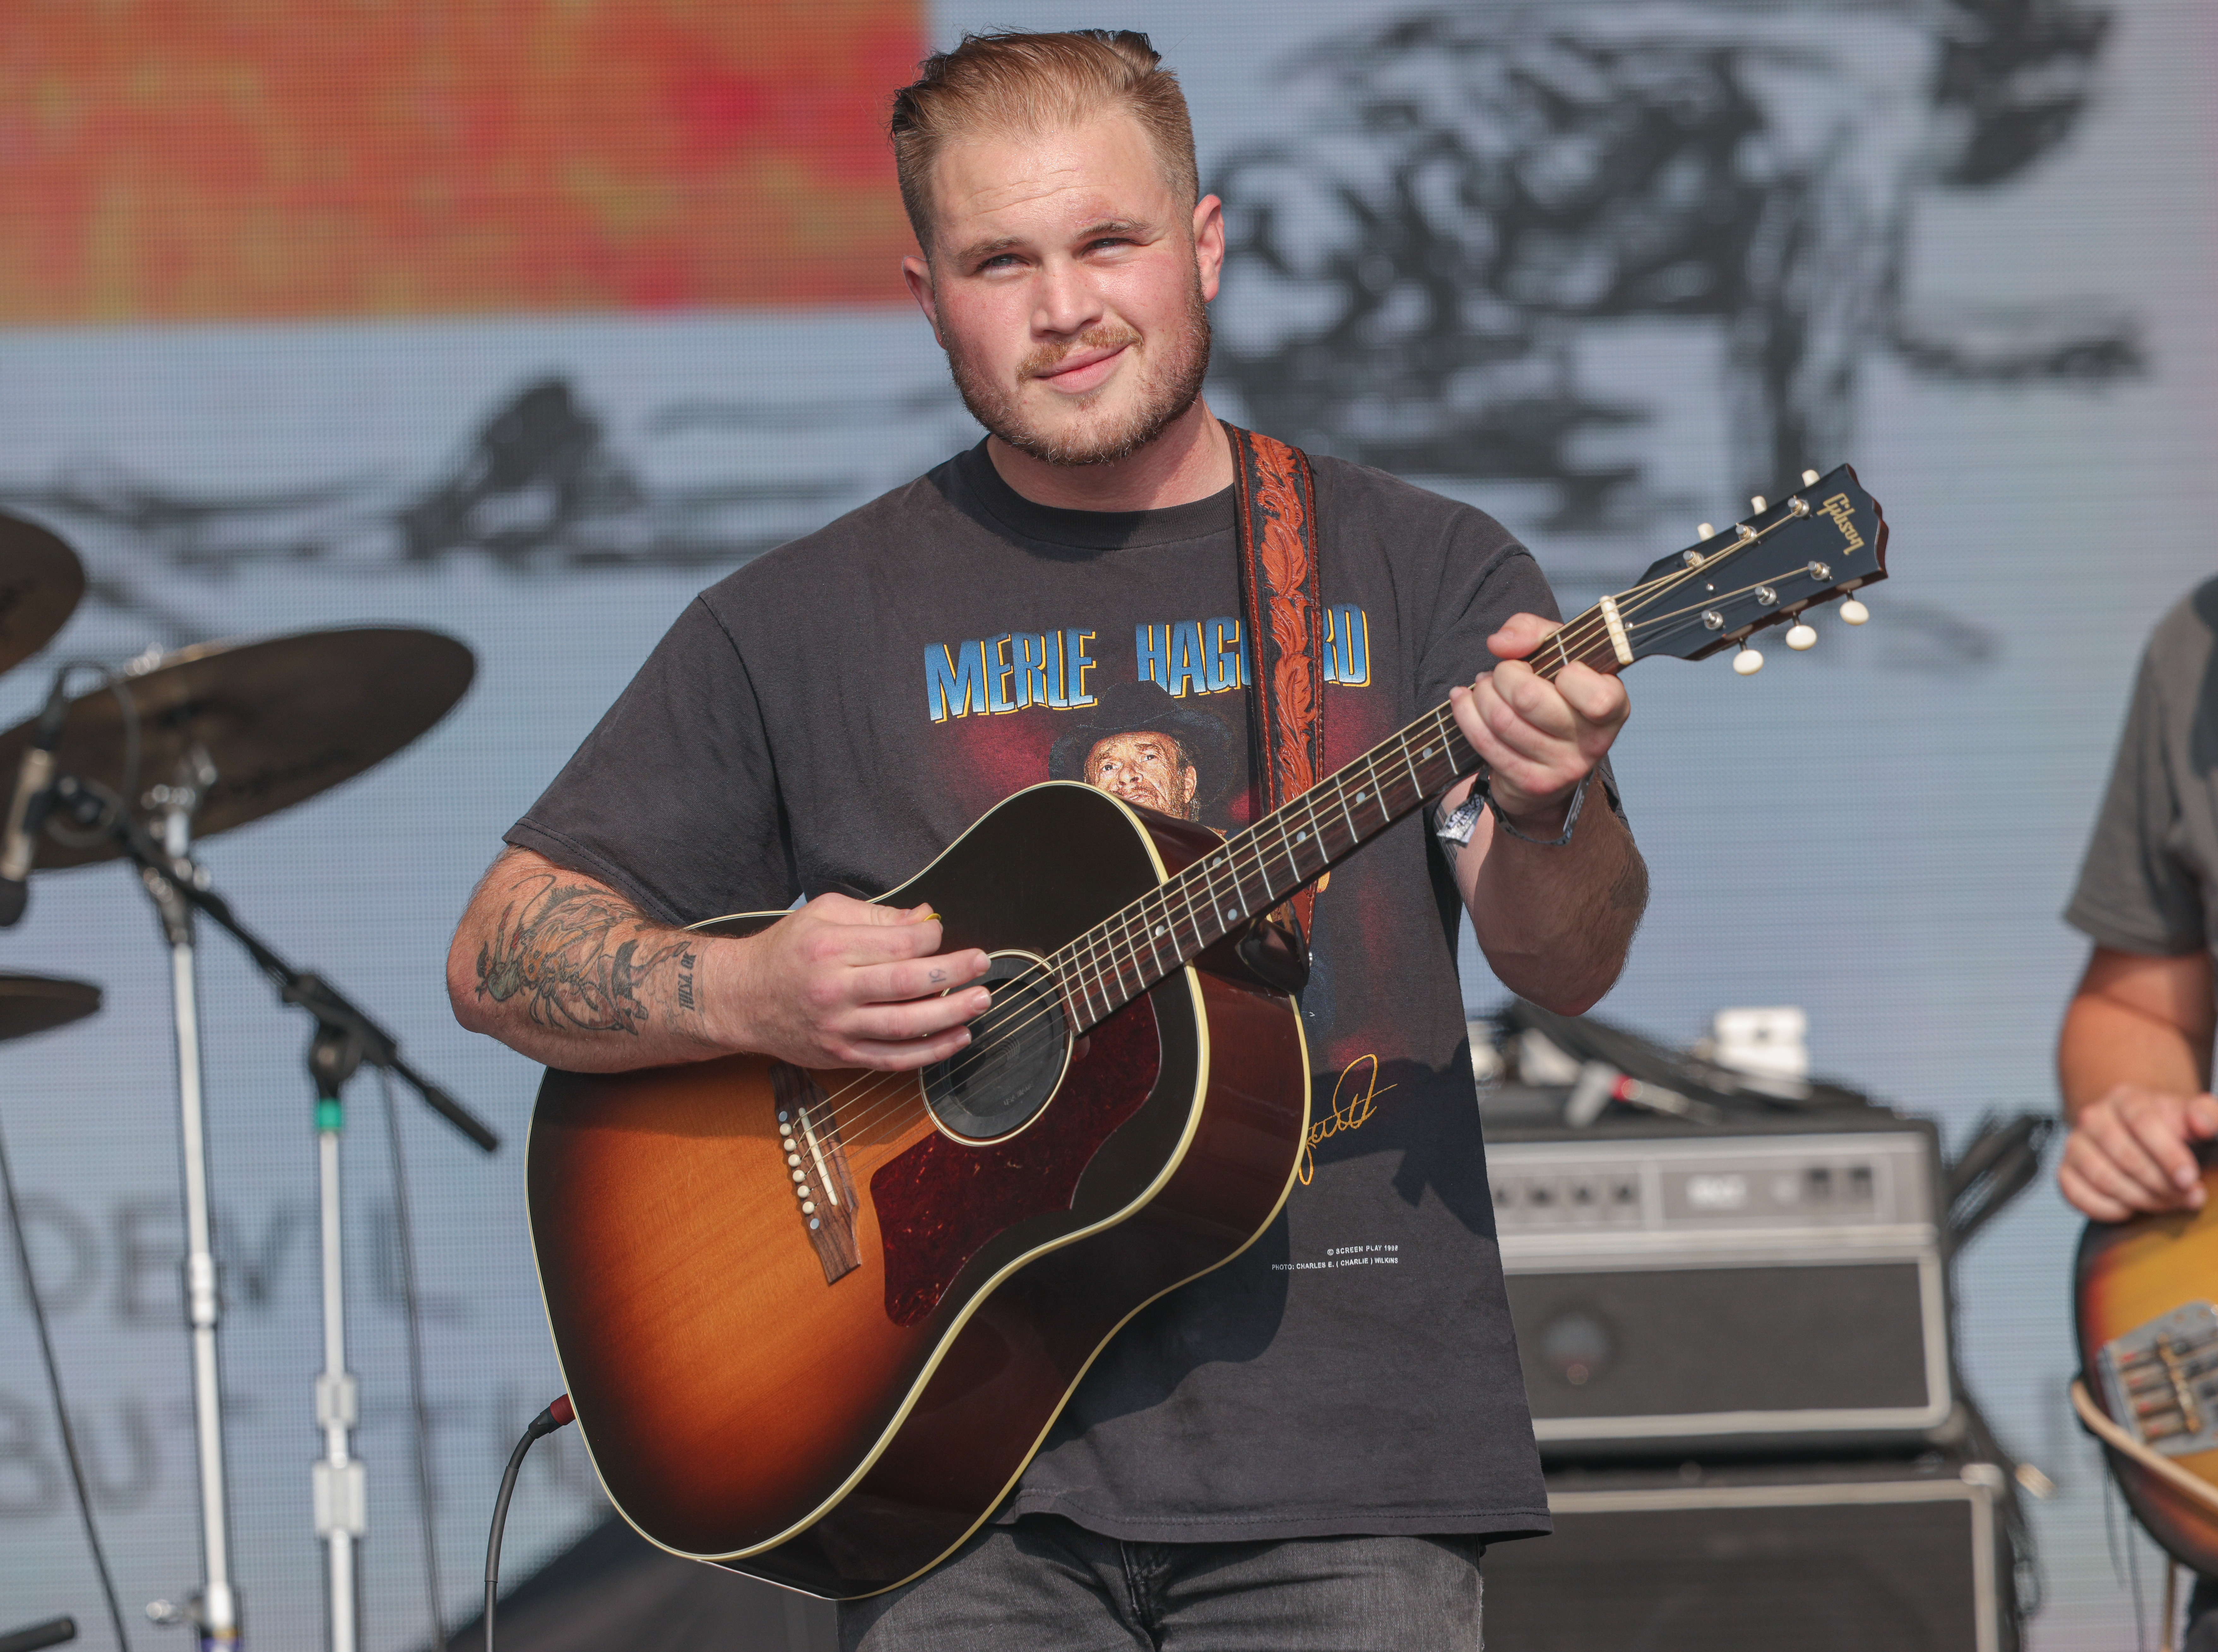 Zach Bryan performs during the Windy City Smokeout on August 5, 2022, in Chicago, Illinois. | Source: Getty Images